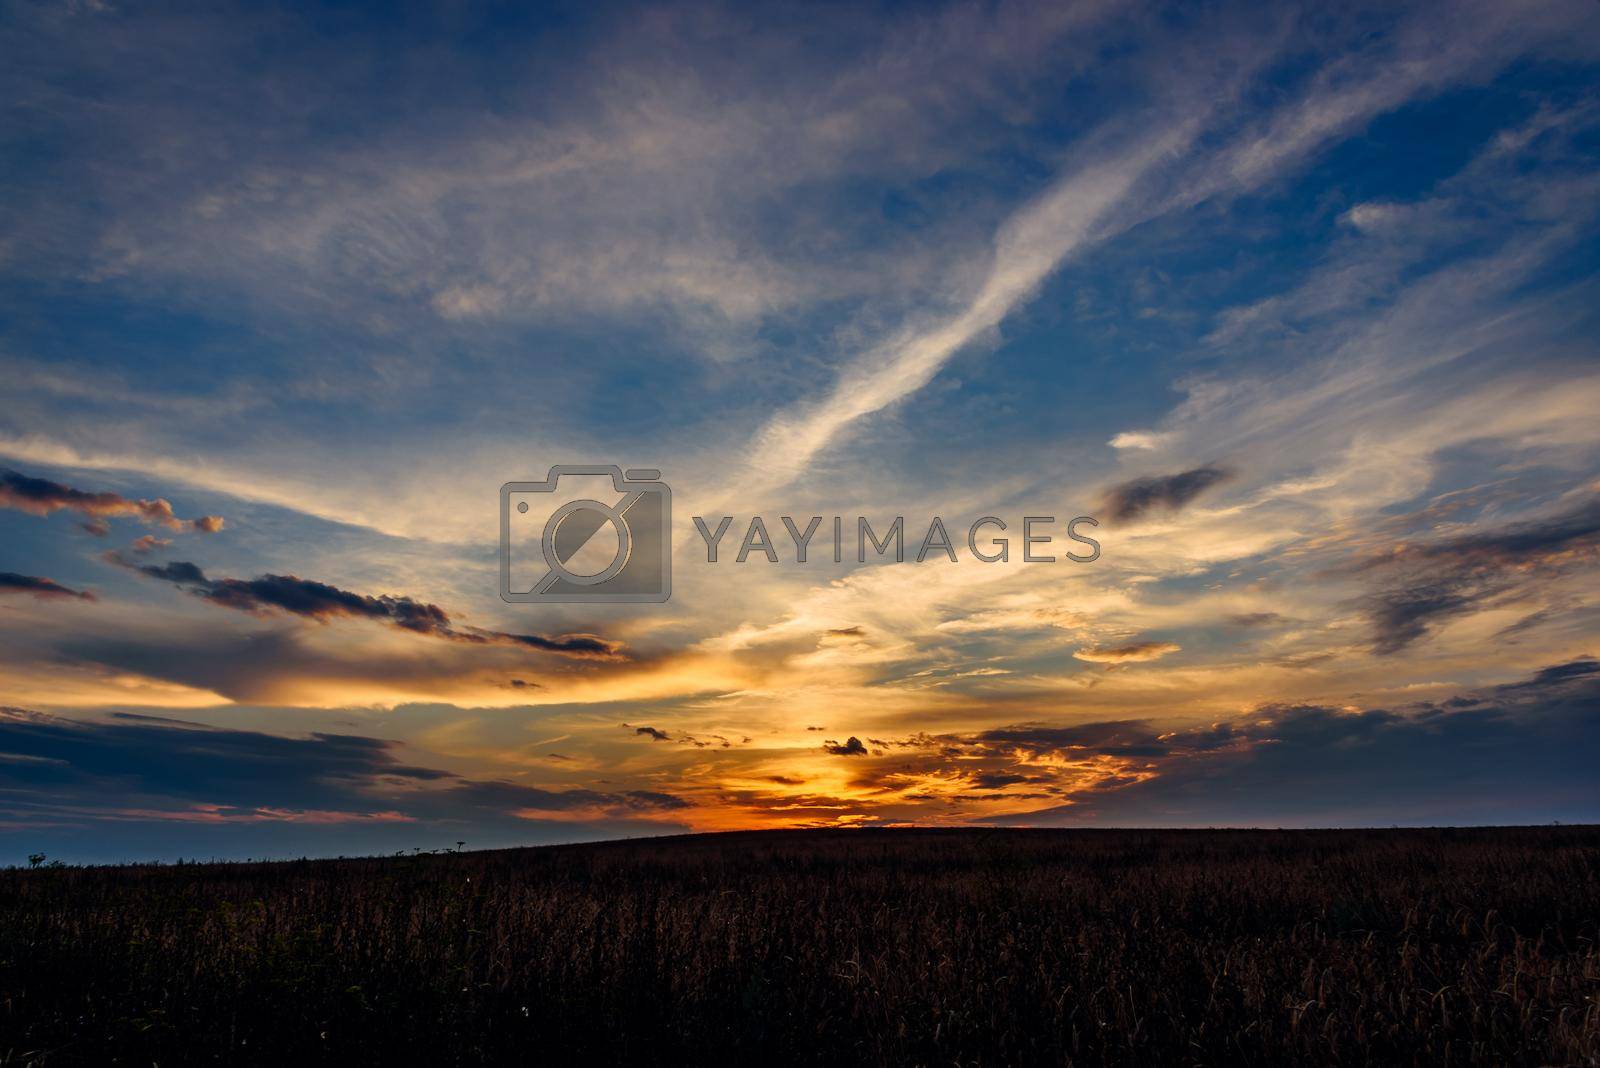 Royalty free image of Sunset sky over the field by Seva_blsv